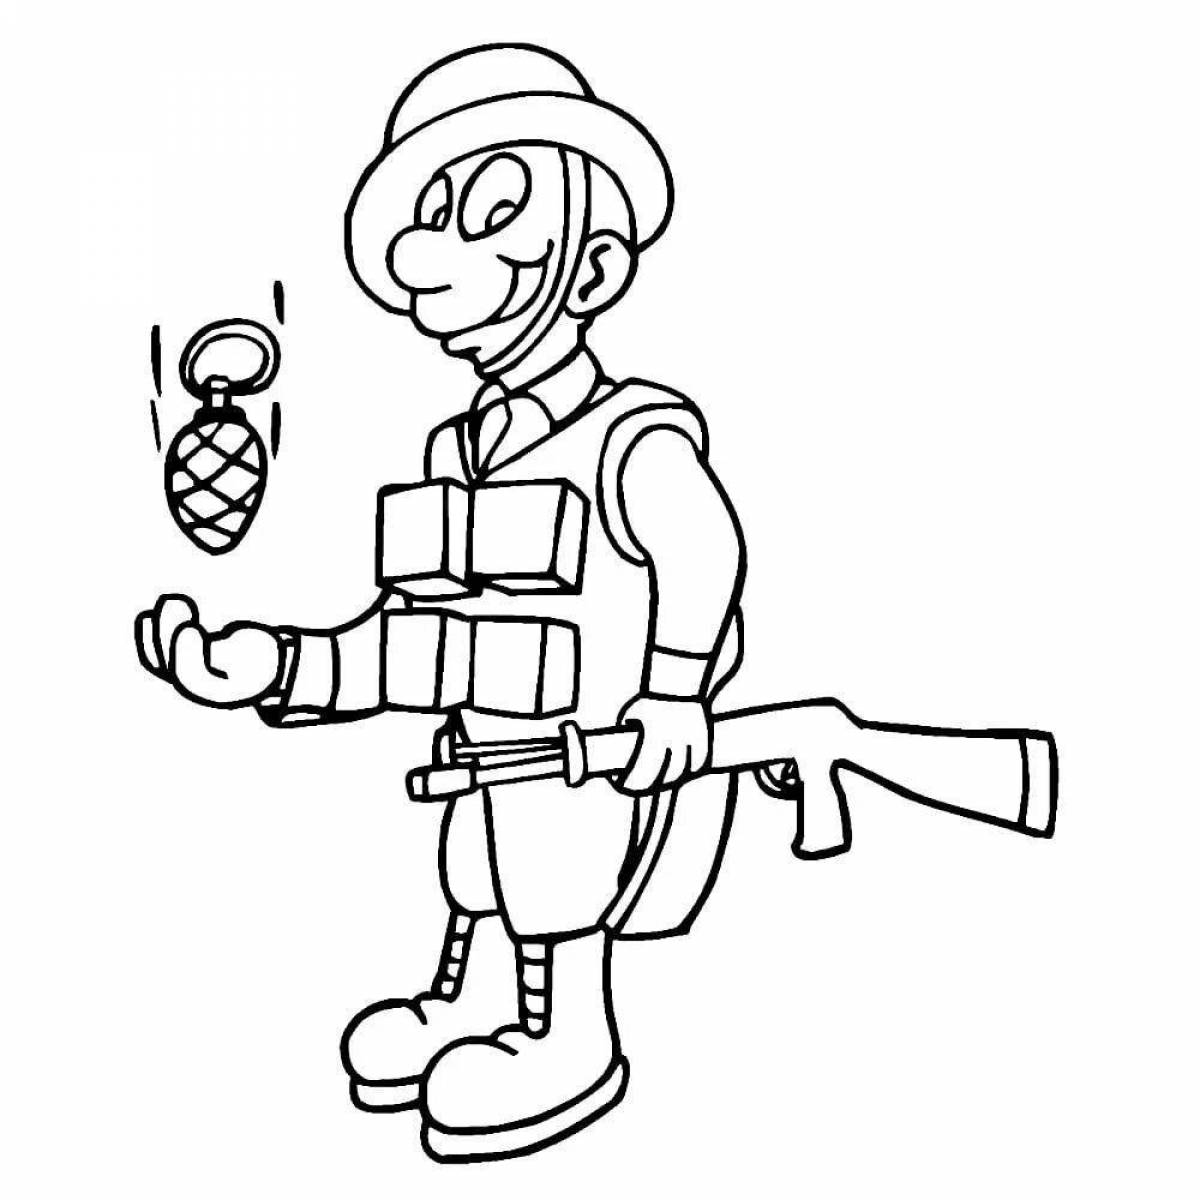 Soldiers coloring pages for kids